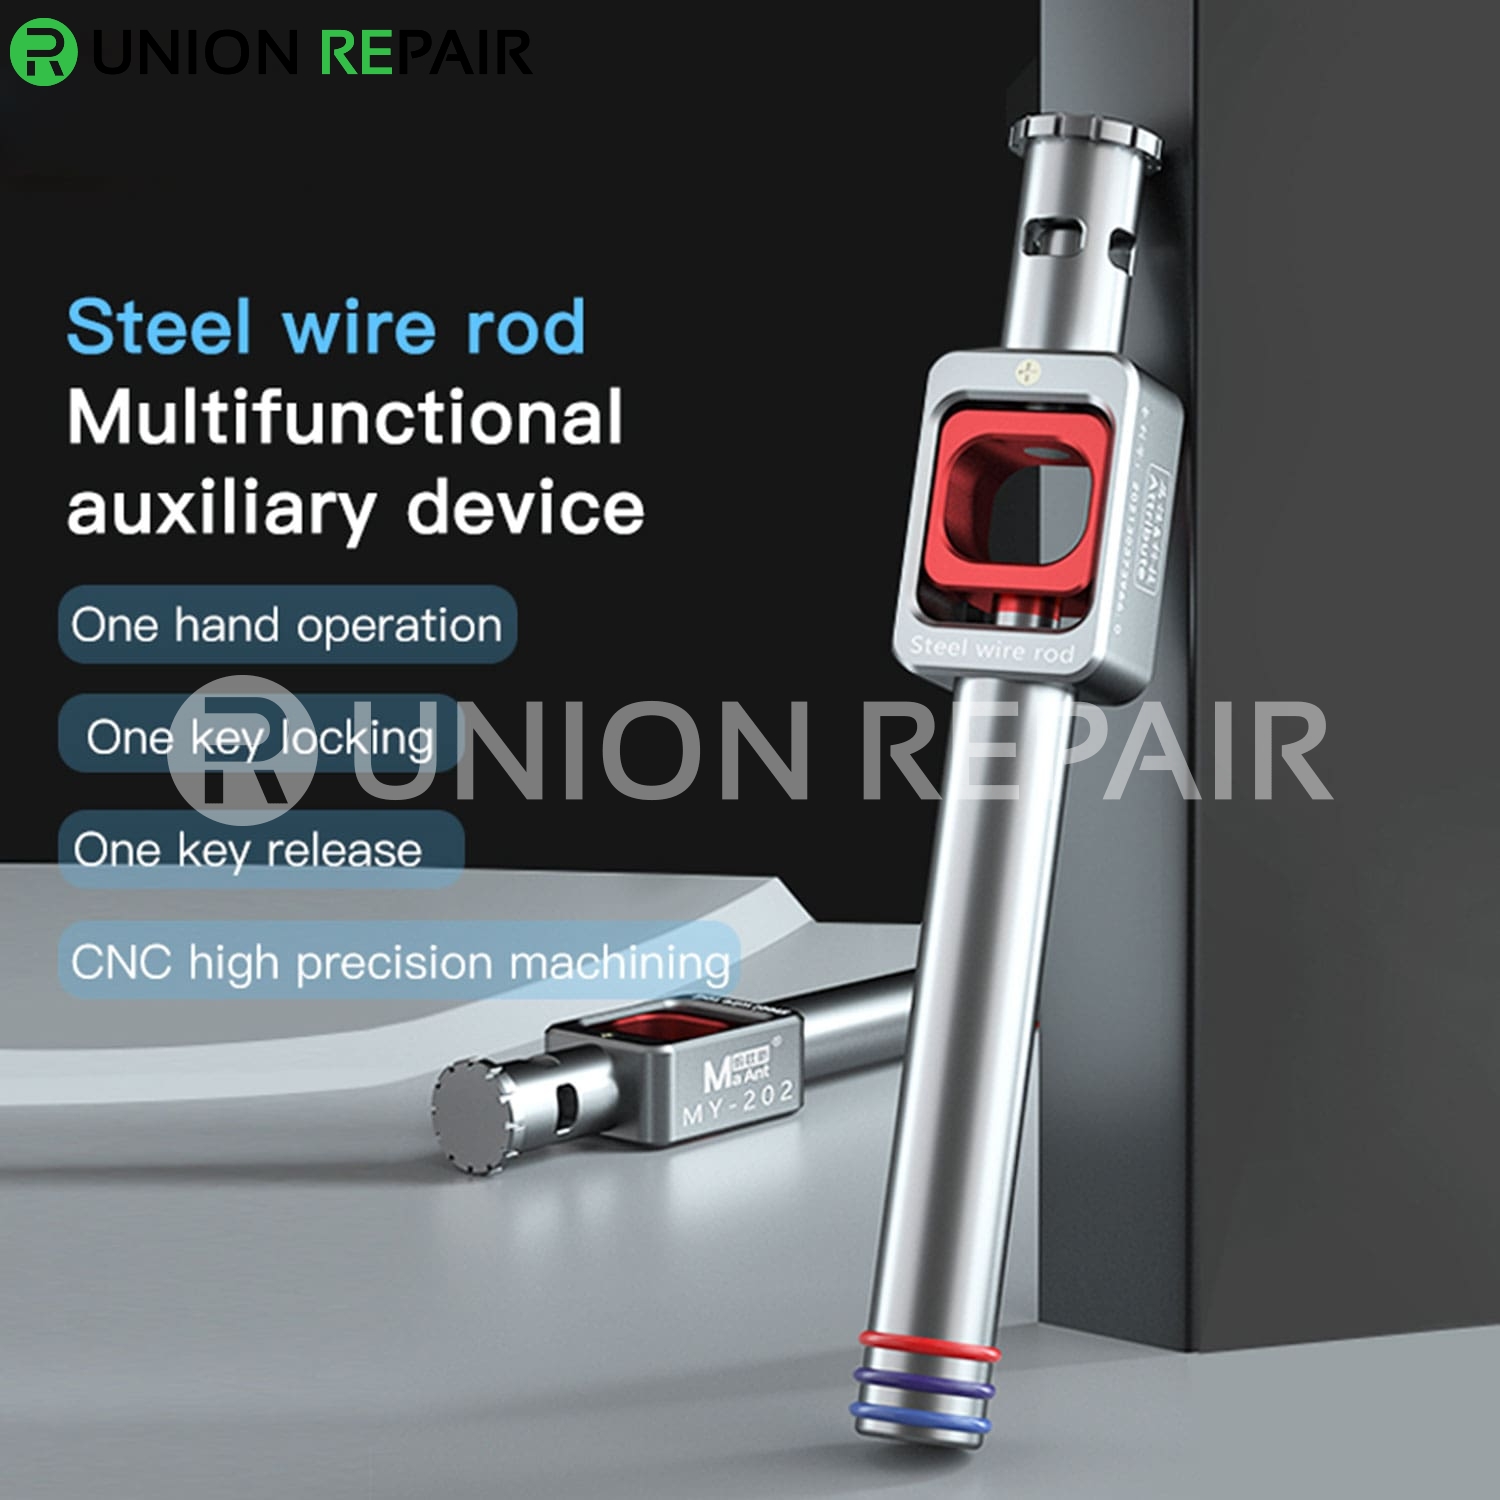 MaAnt MY-202 Steel Wire Rod Multifunctional Auxiliary Device